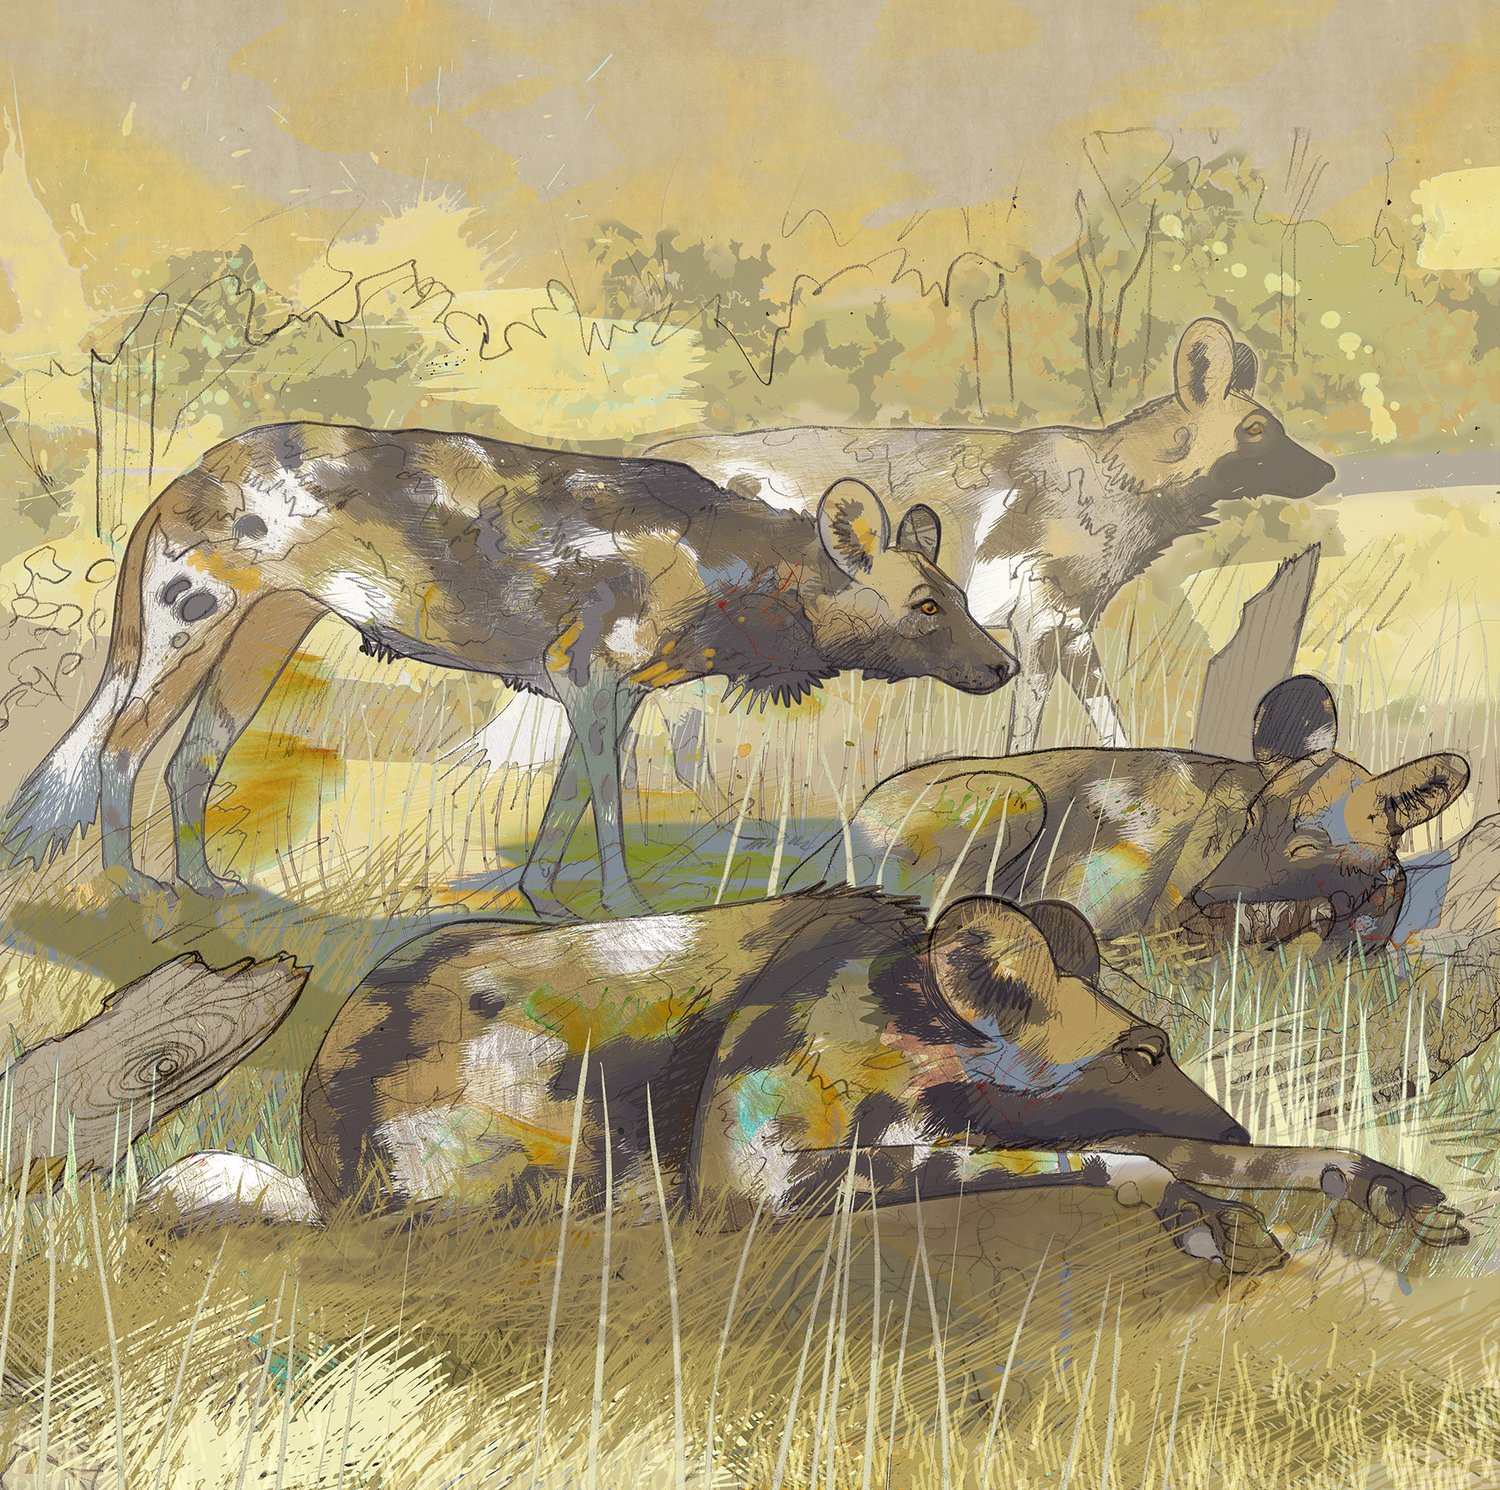 Image of Painted Dogs - South Luangwa - Zambia